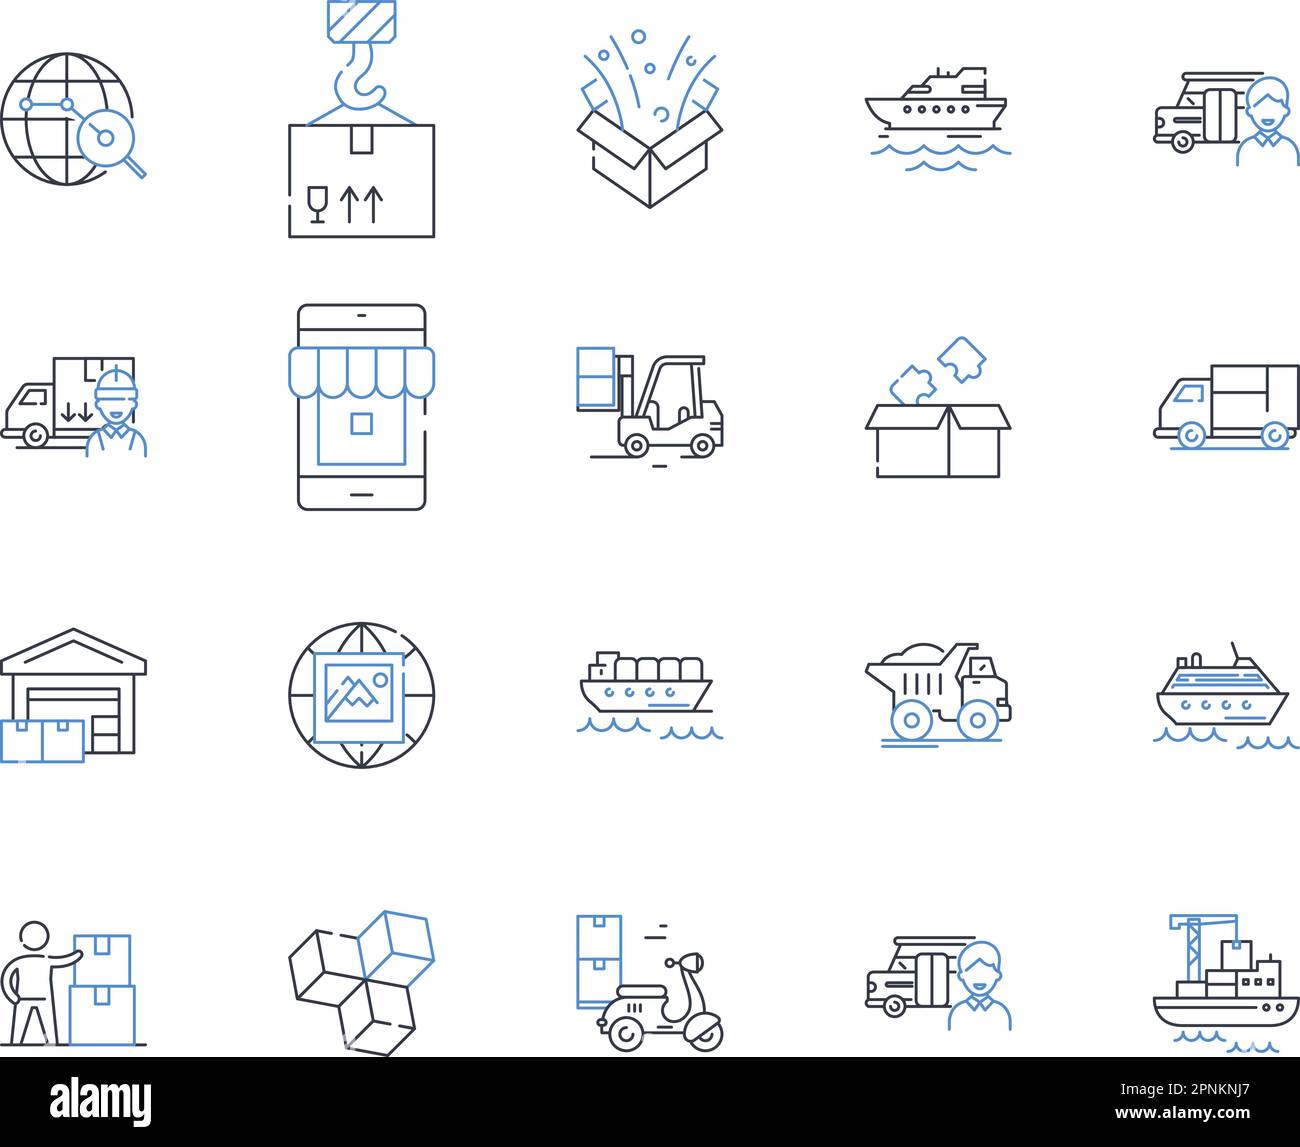 Messenger services line icons collection. Communication, Chat, IM, Texting, Messaging, Conversations, Voice vector and linear illustration. Video Stock Vector